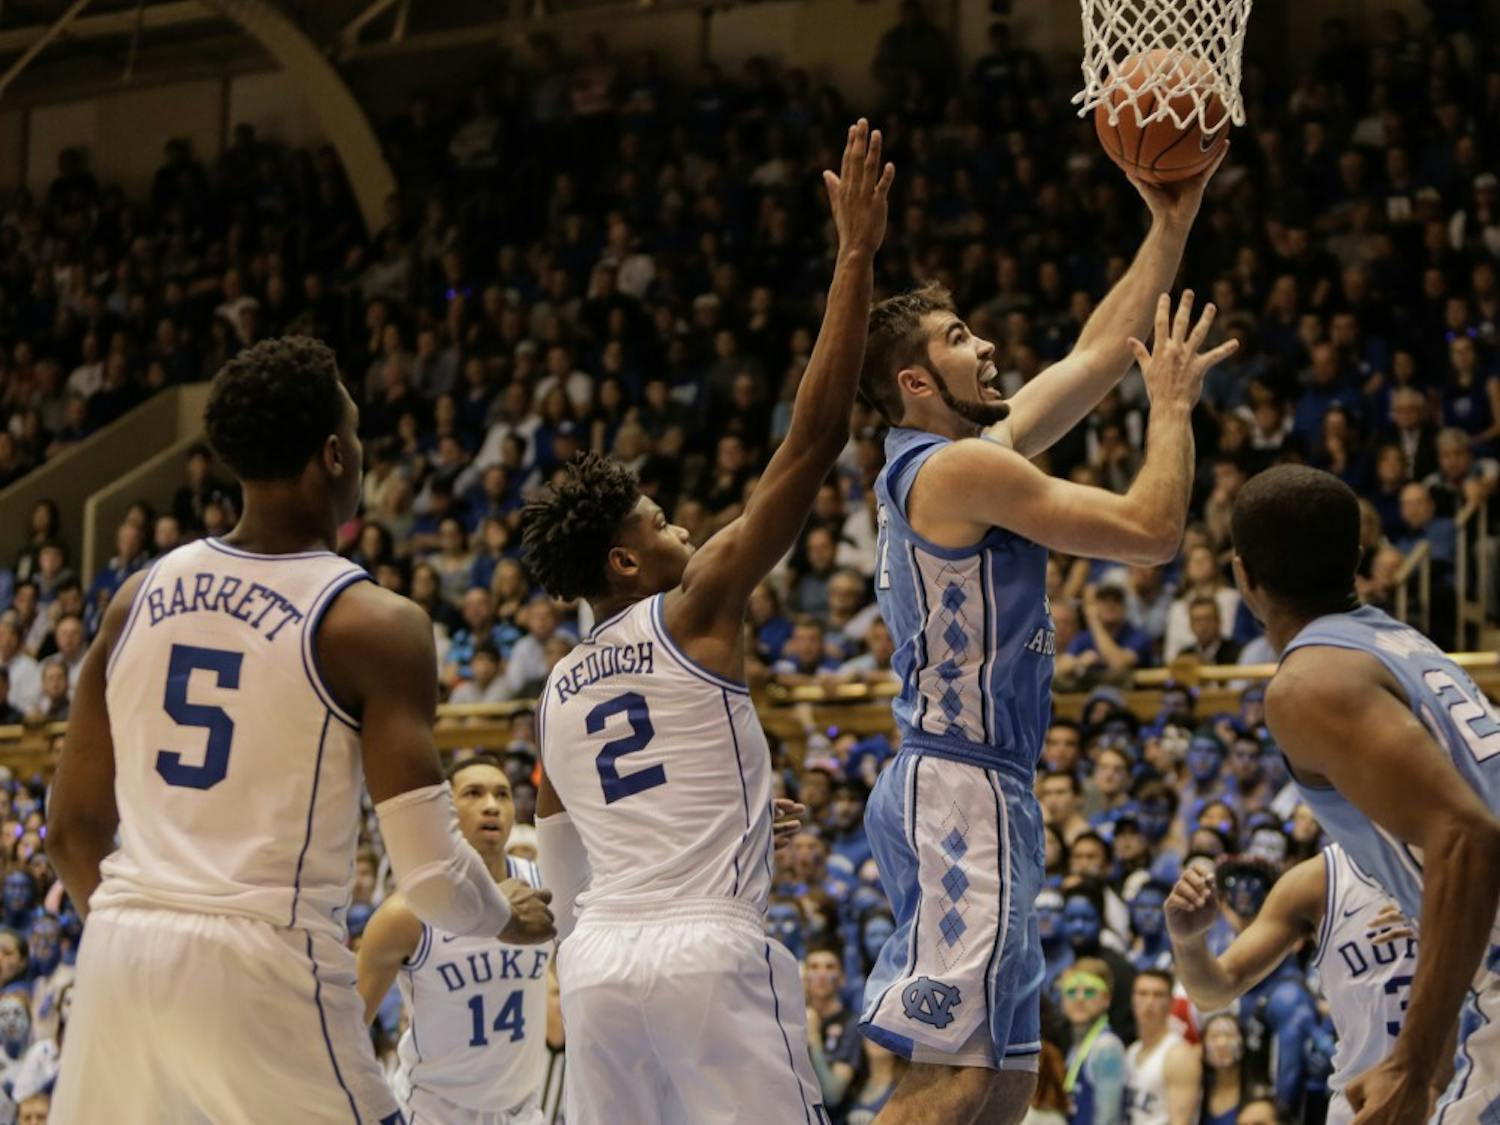 UNC forward Luke Maye (32) takes a shot during Wednesday night's game at Cameron Indoor Stadium. Maye scored 30 points and had 15 rebounds.&nbsp;